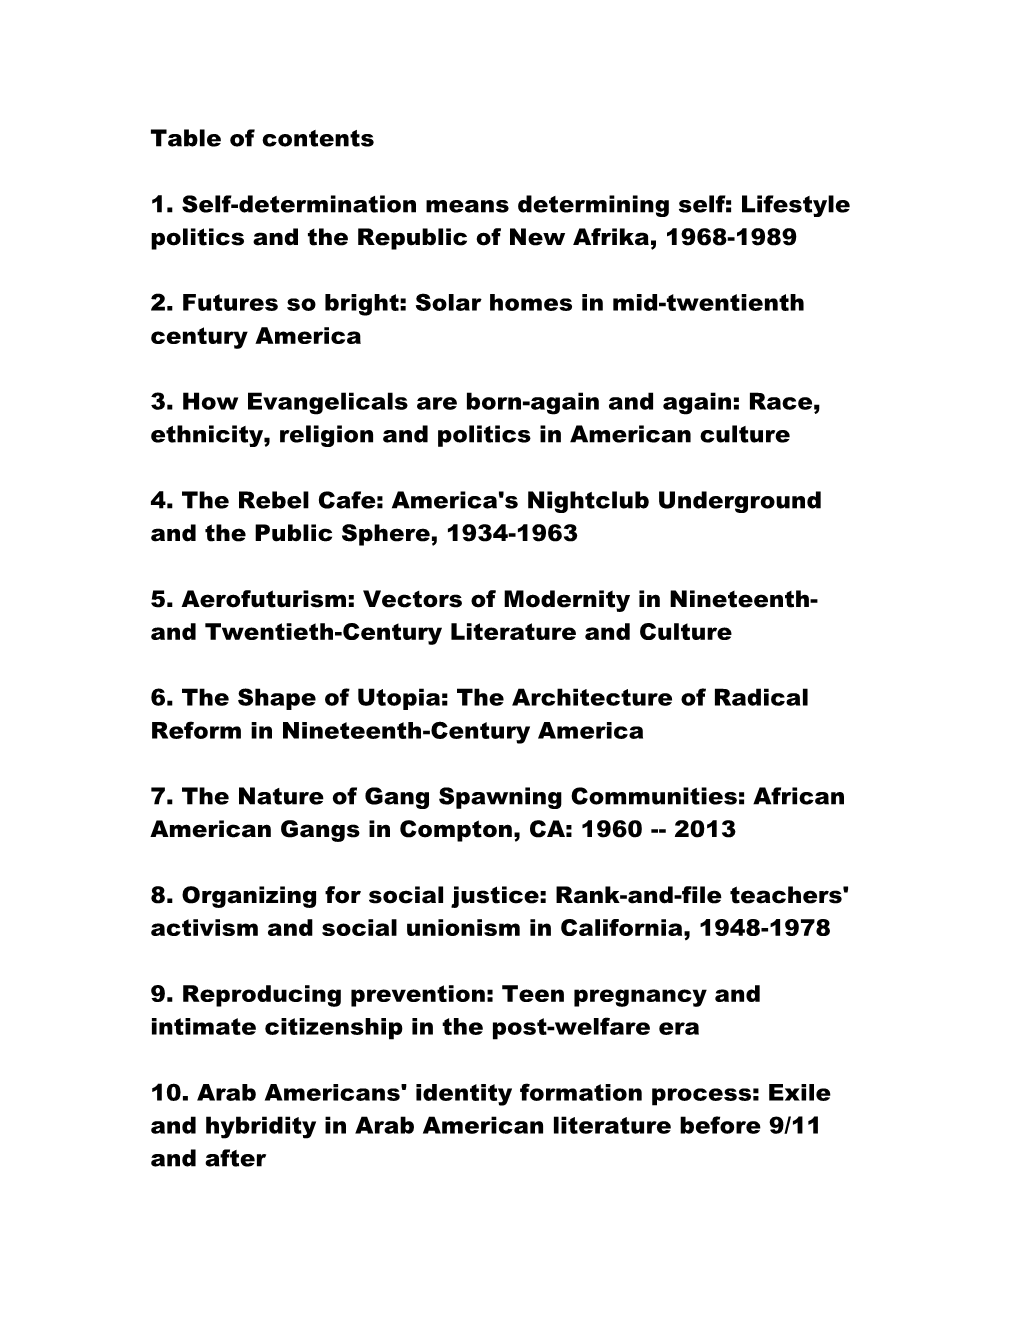 Lifestyle Politics and the Republic of New Afrika, 1968-1989